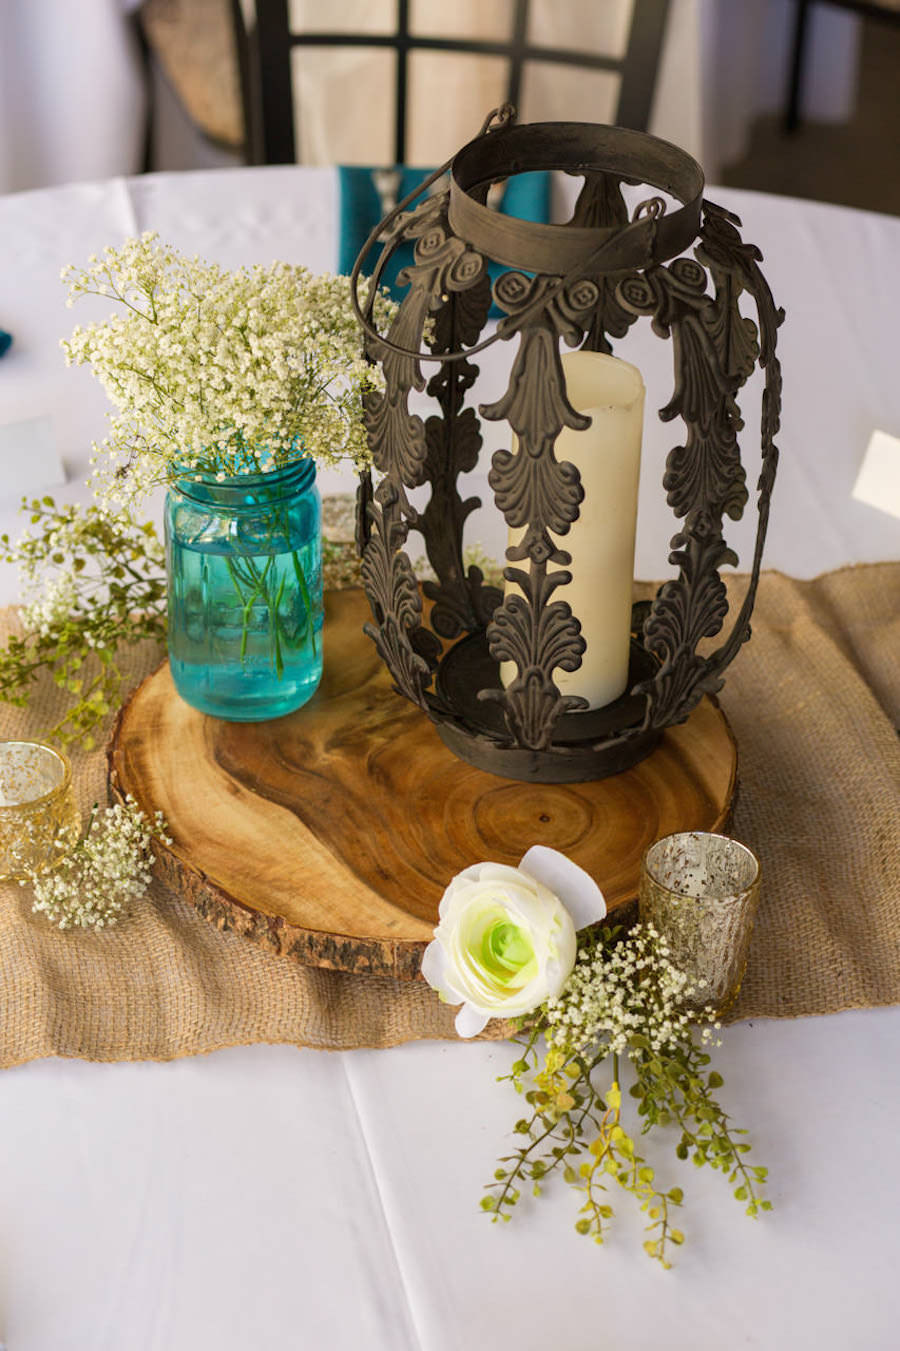 Rustic Wedding Reception Table Decor with Wooden Slab, Baby's Breath in Blue Mason Jars, and Vintage Candle Lanterns